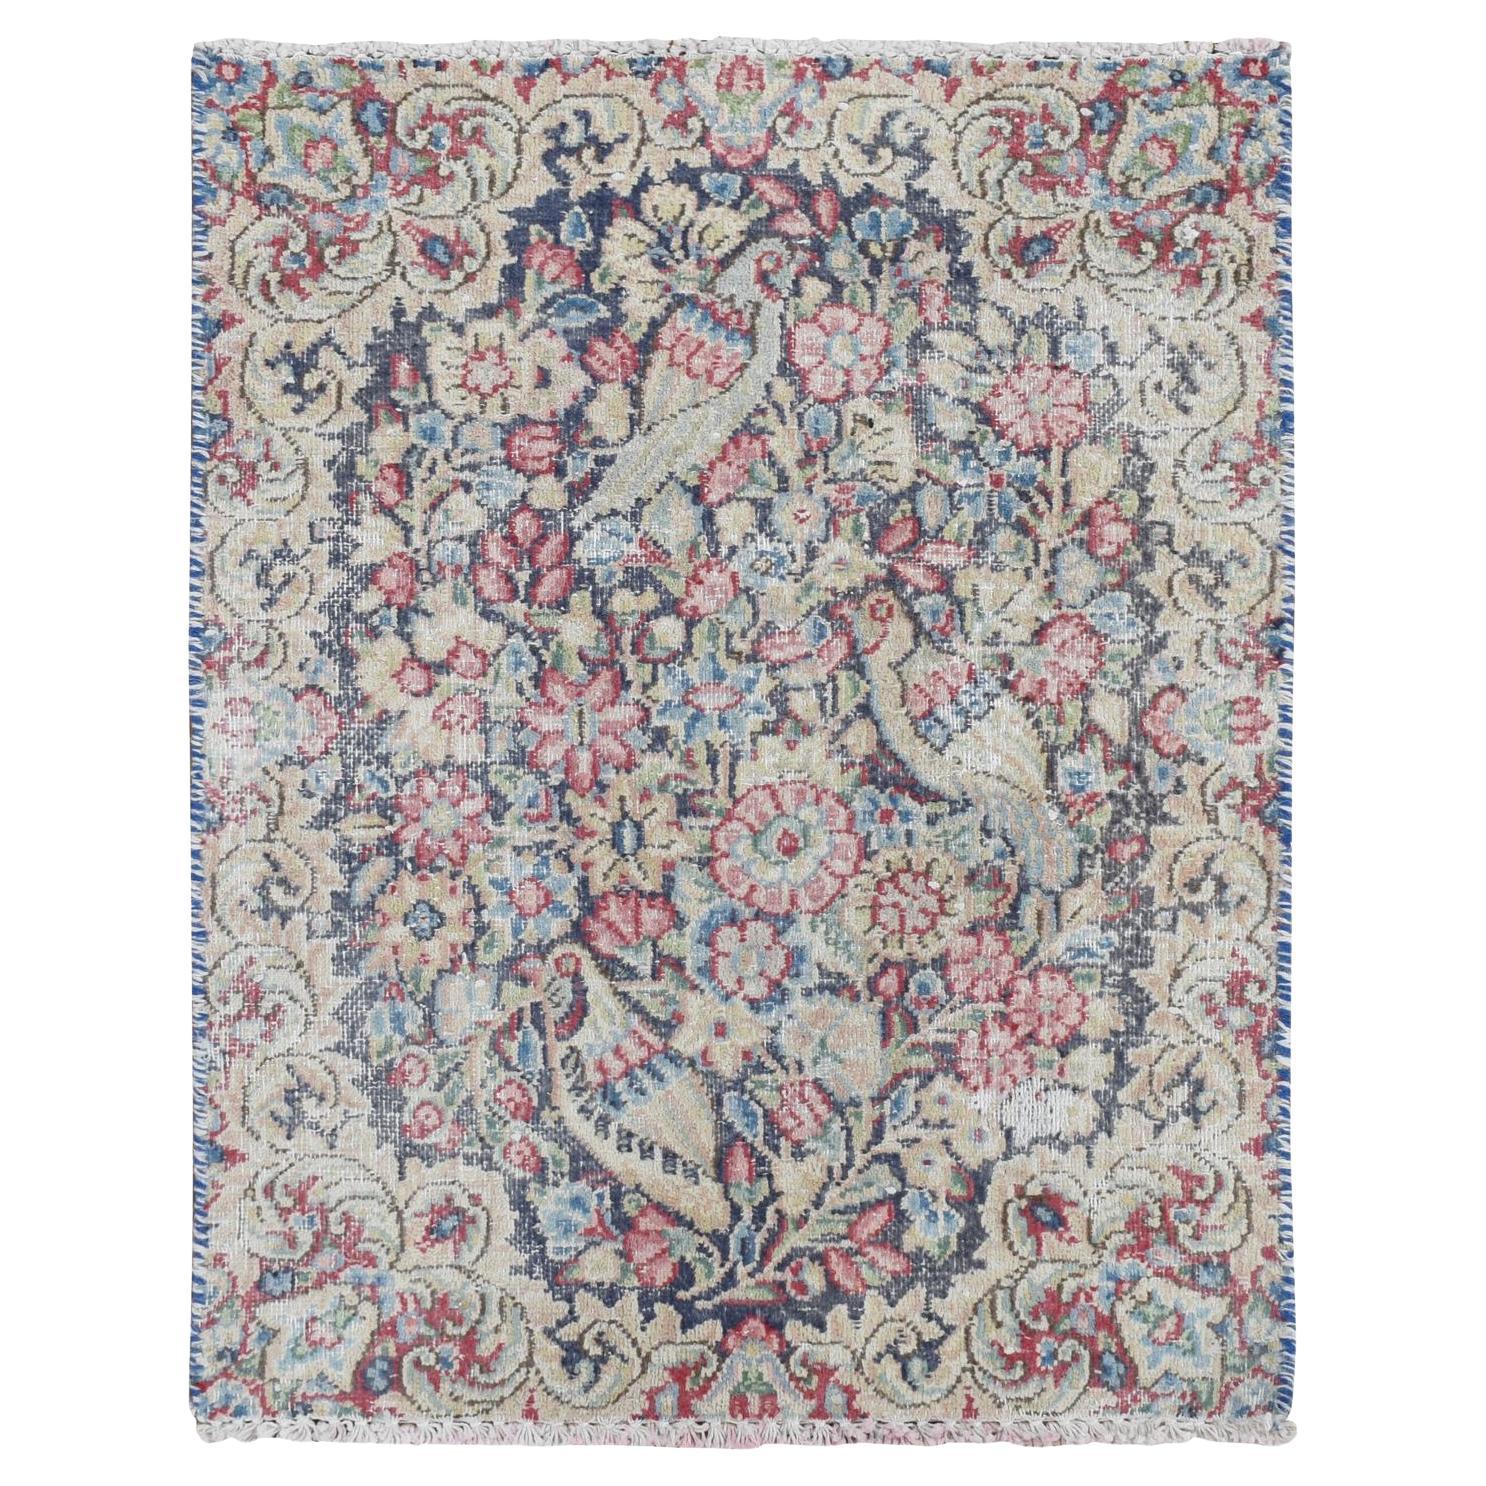 Blue Pure Wool Vintage and Worn Persian Kerman Hand Knotted Mat Rug 1'6"x2' For Sale